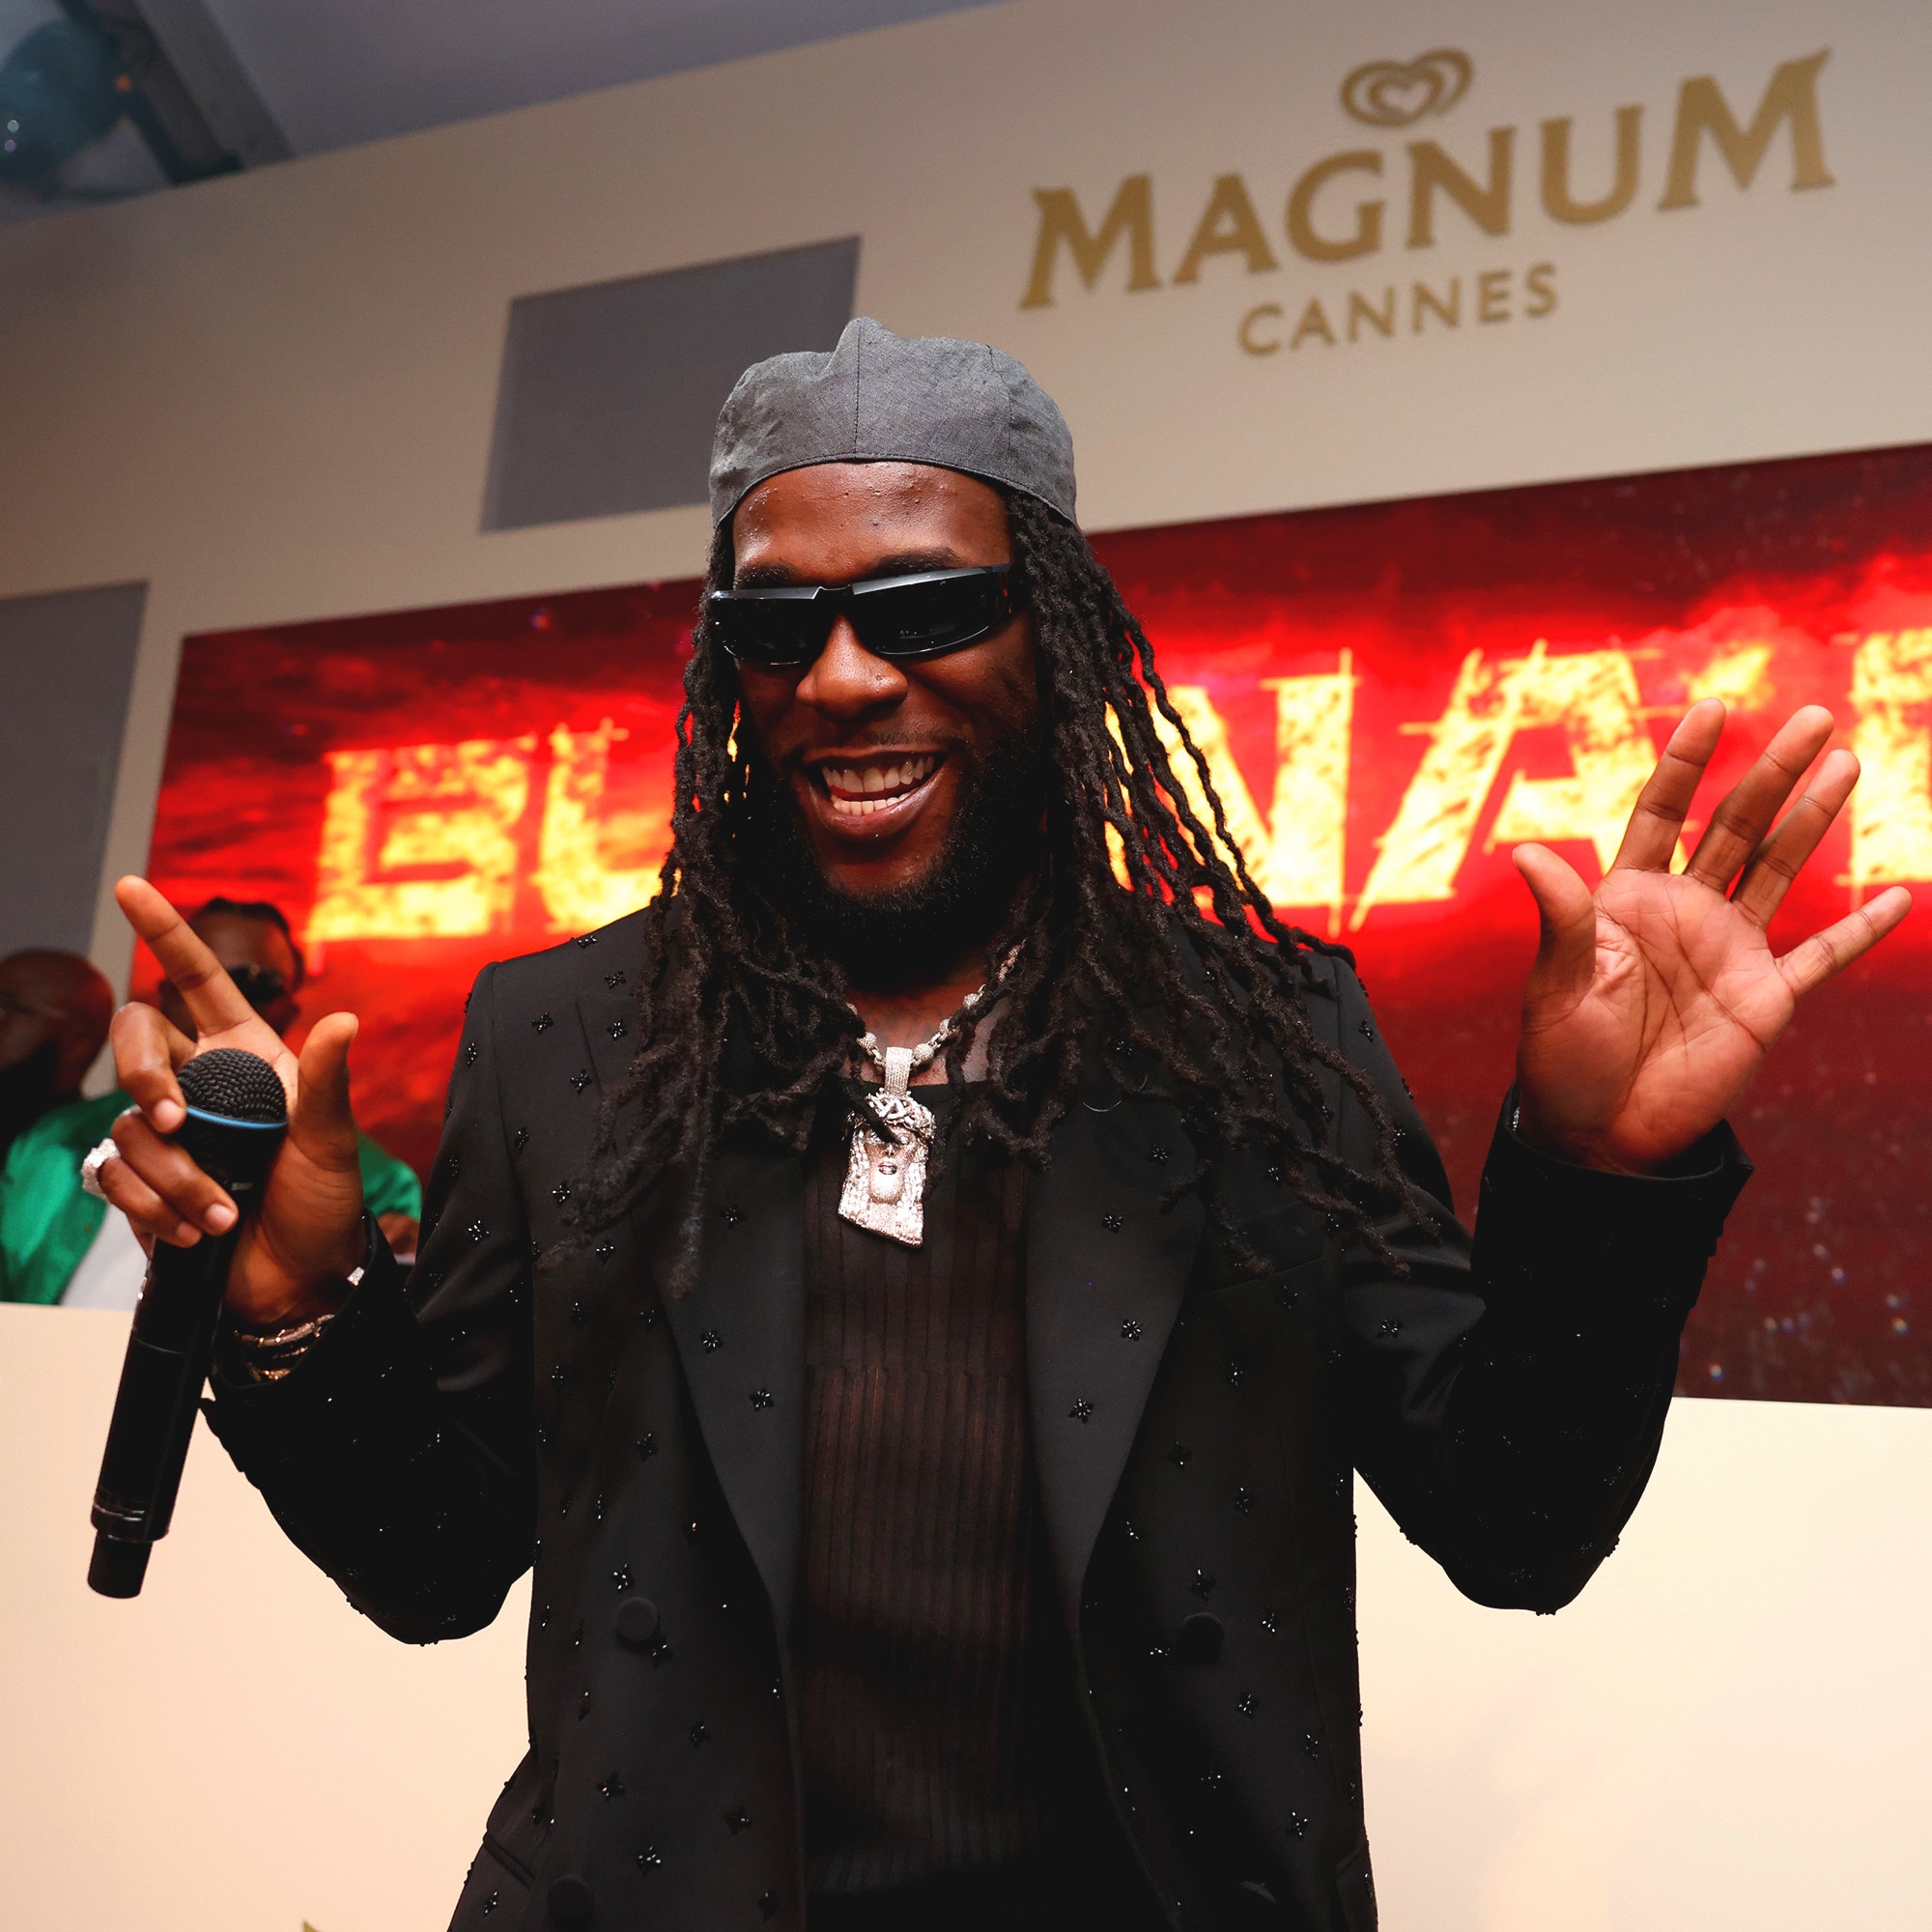 Singer Burna Boy on stage at the Magnum Cannes party